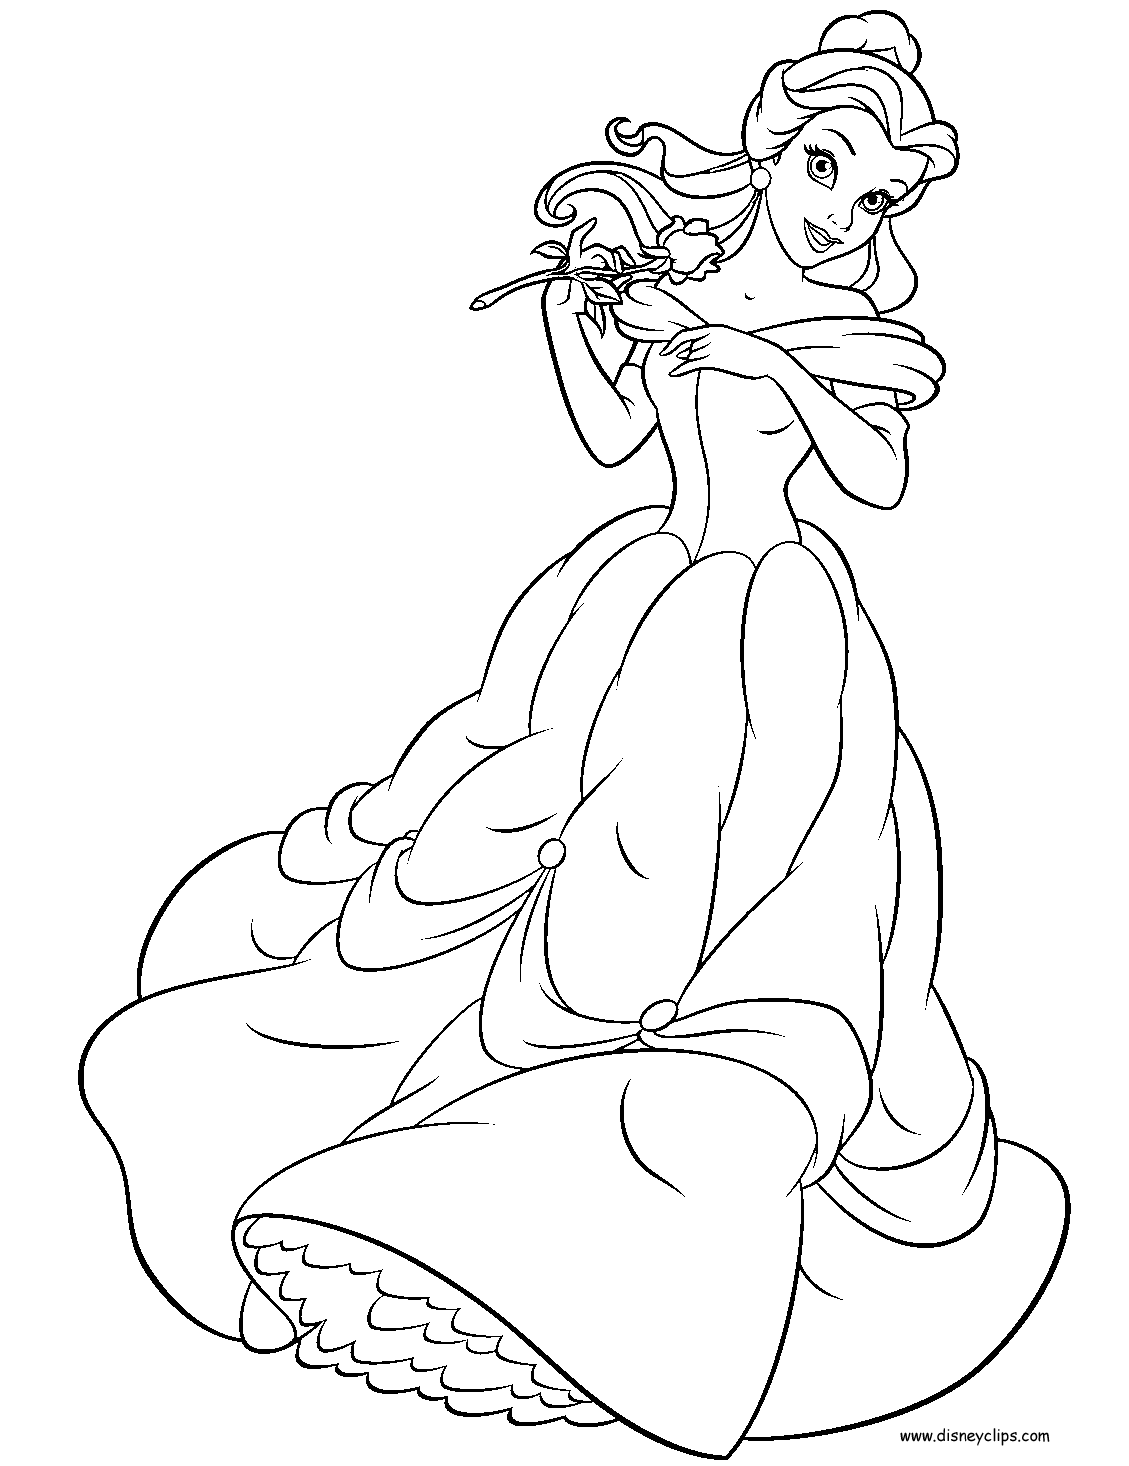 Princess Belle Coloring Pages Free 10